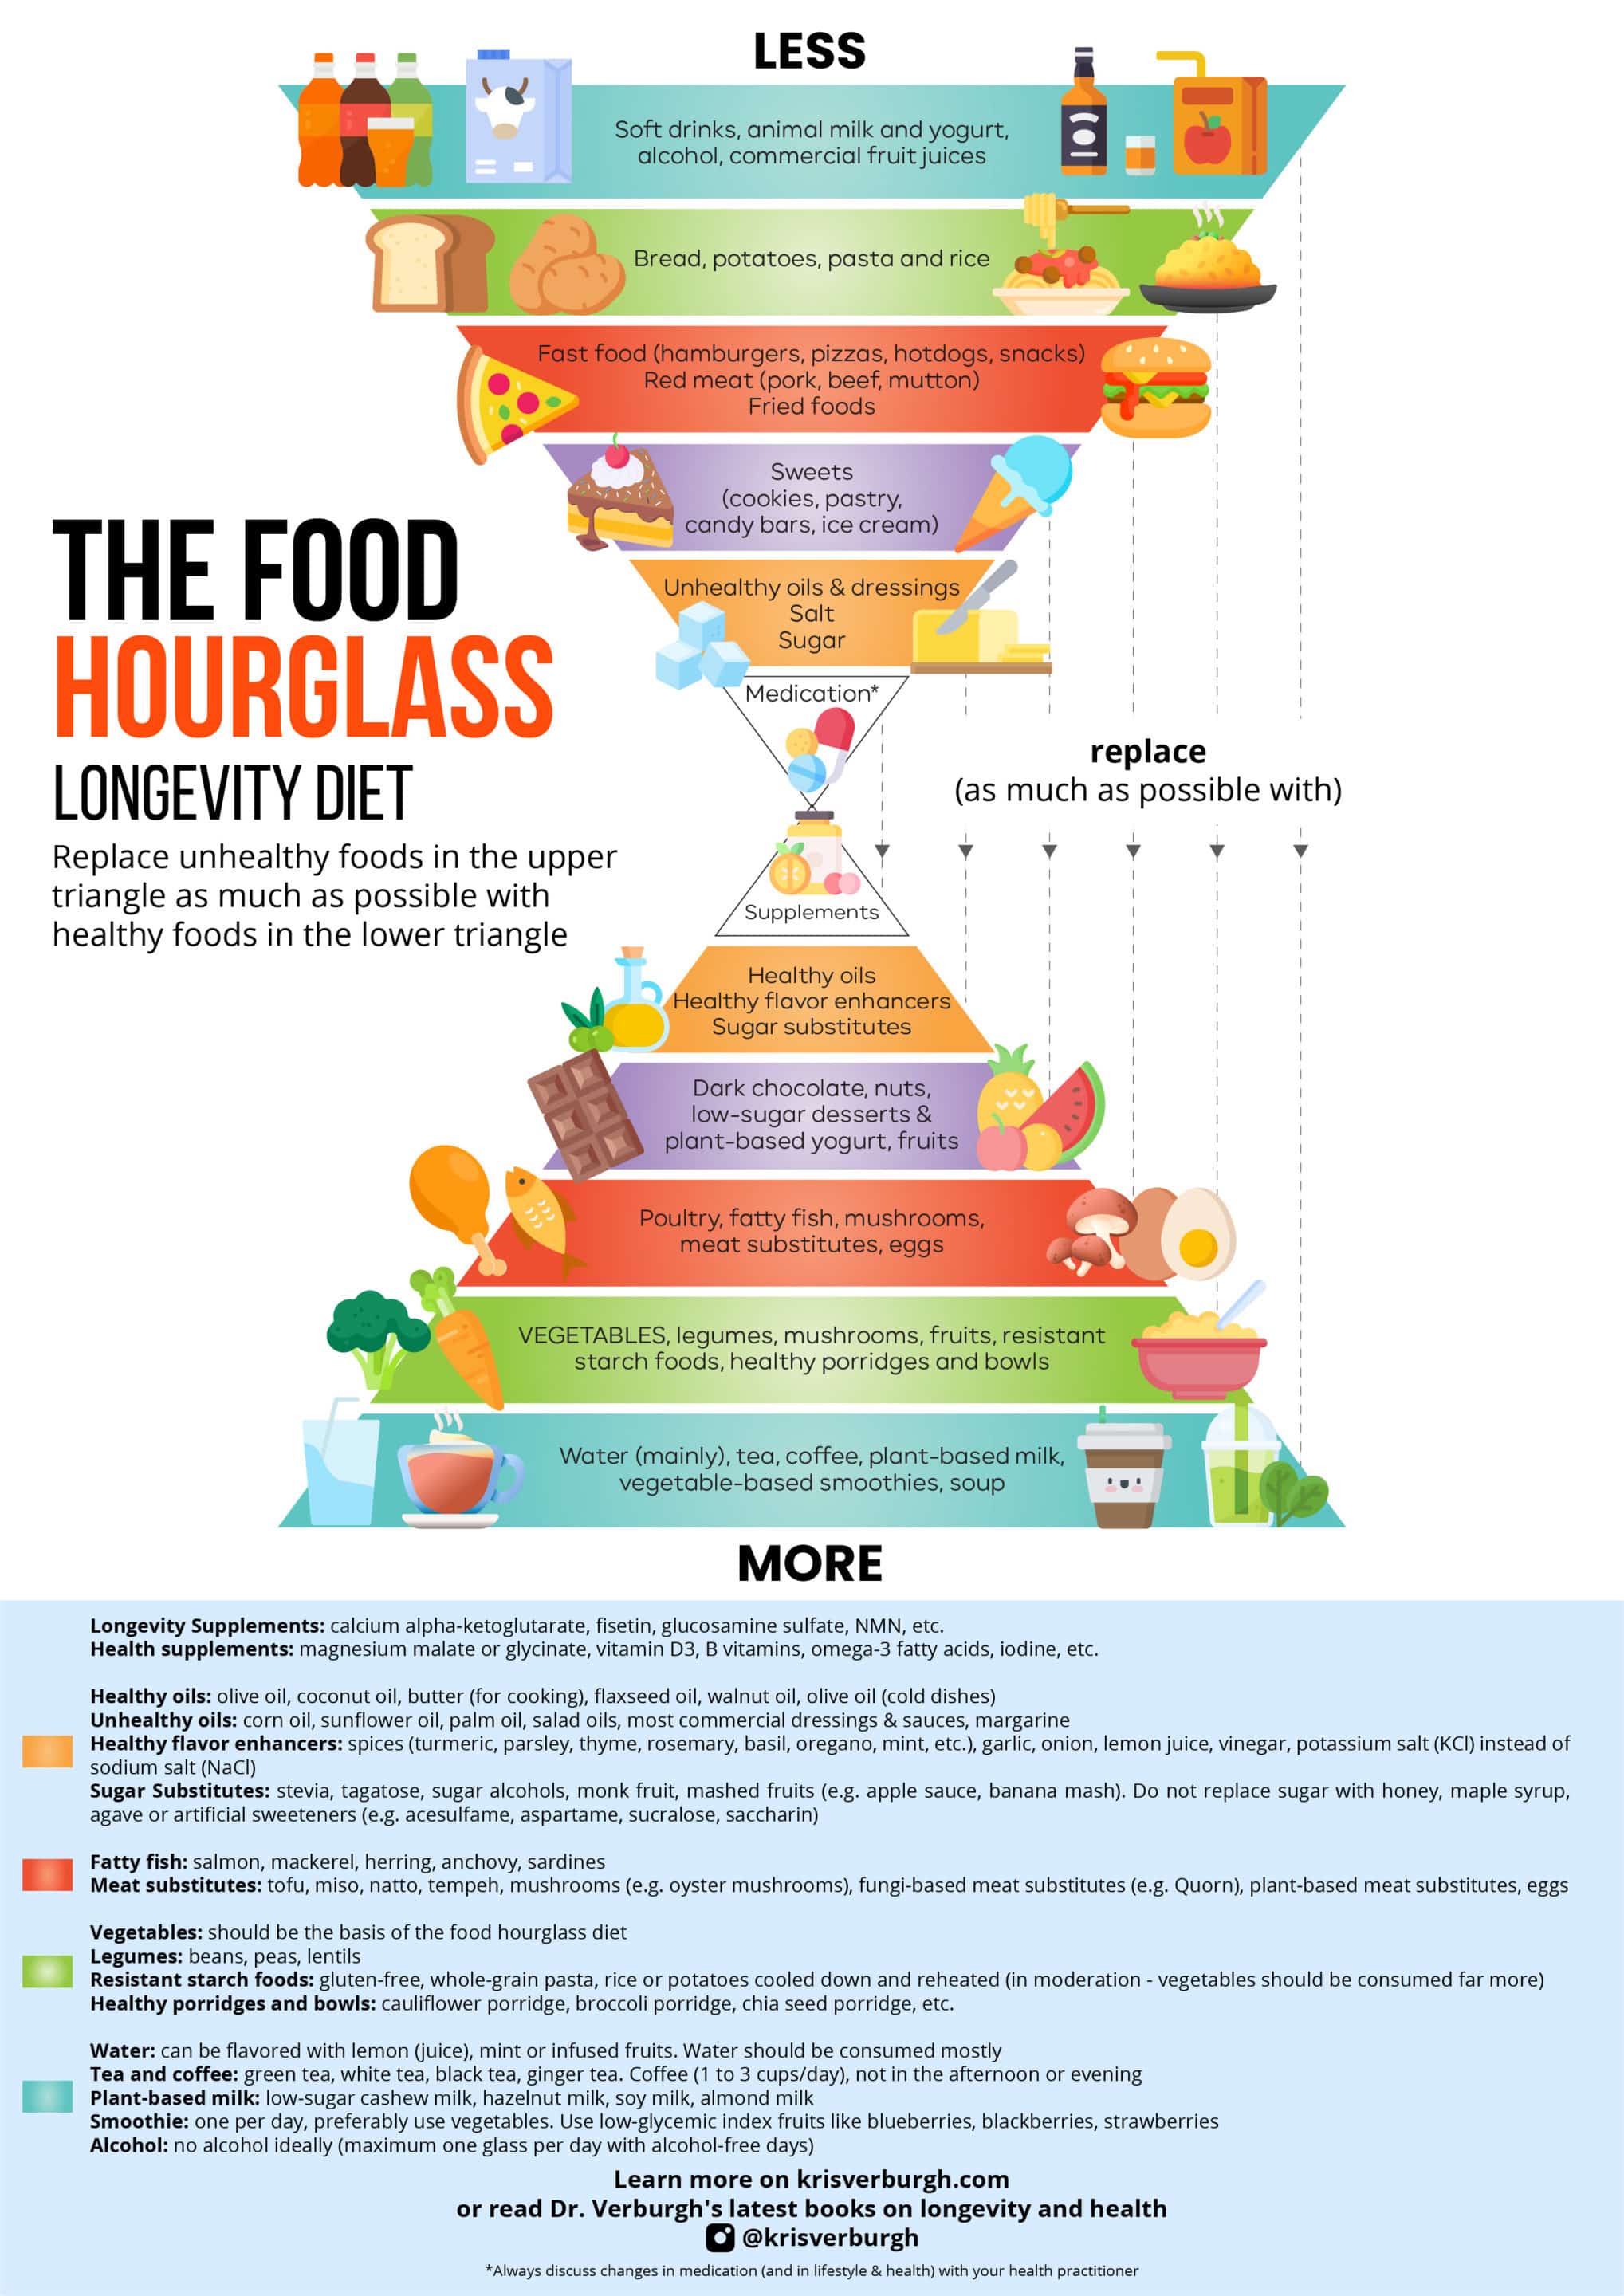 Food Hourglass Longevity Diet for Anti-Aging and Healthy Nutrition